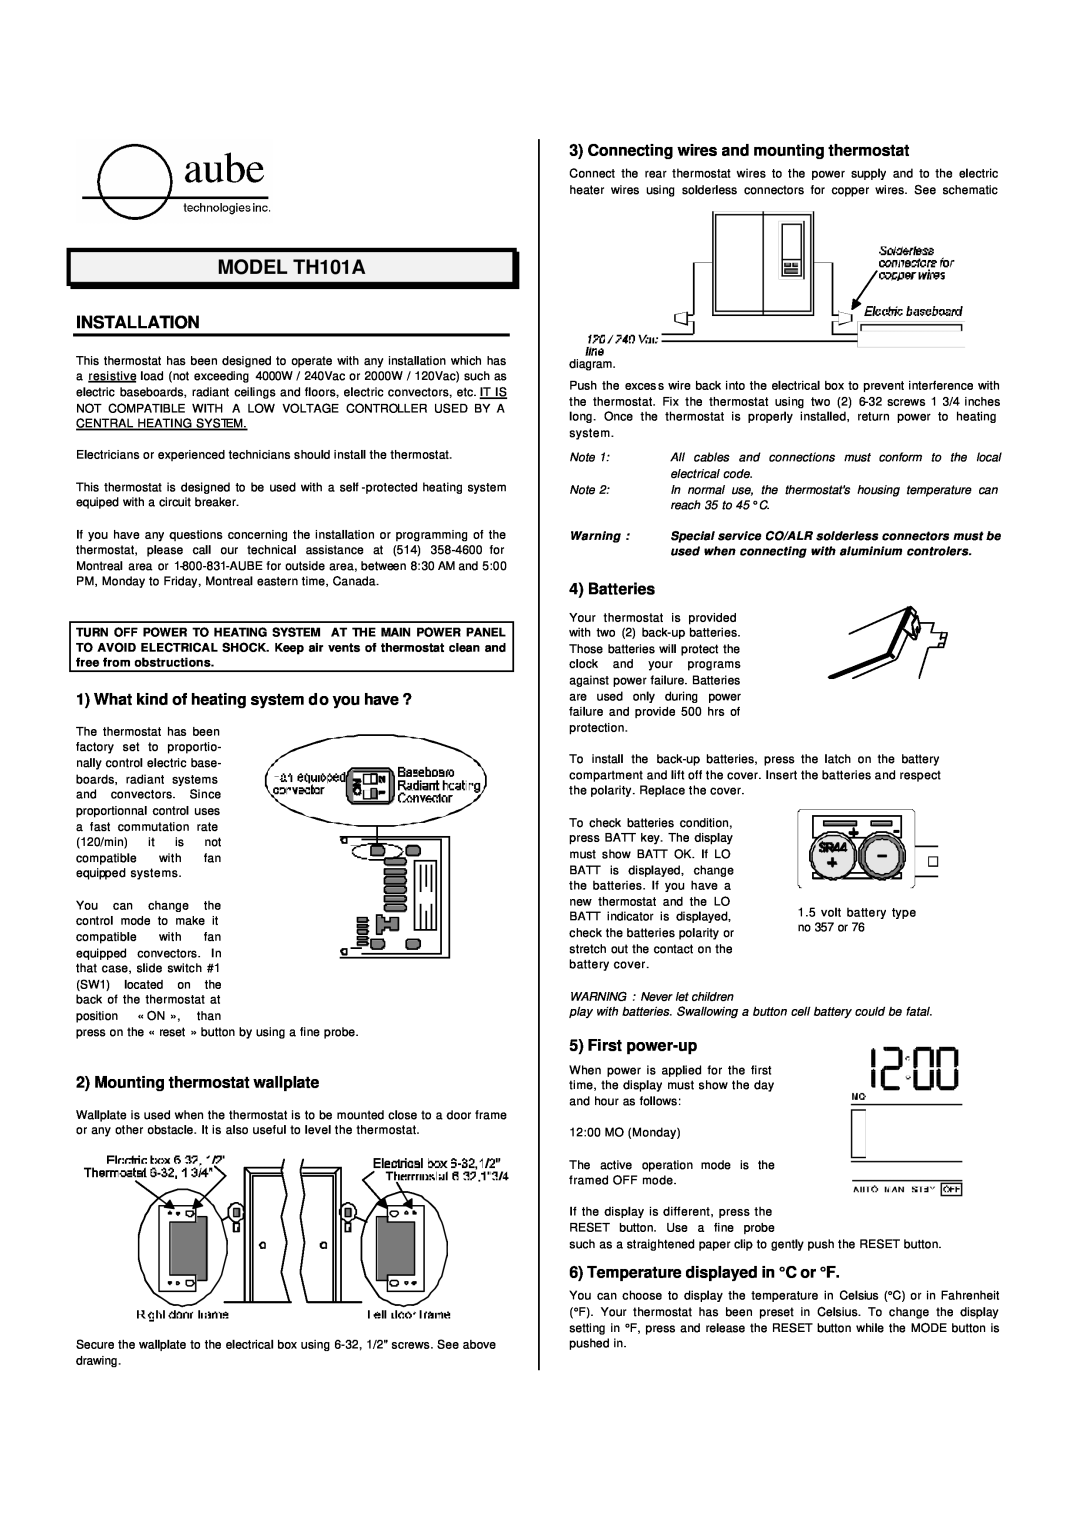 Aube Technologies TH101A manual Installation, What kind of heating system do you have ?, Batteries, First power-up 